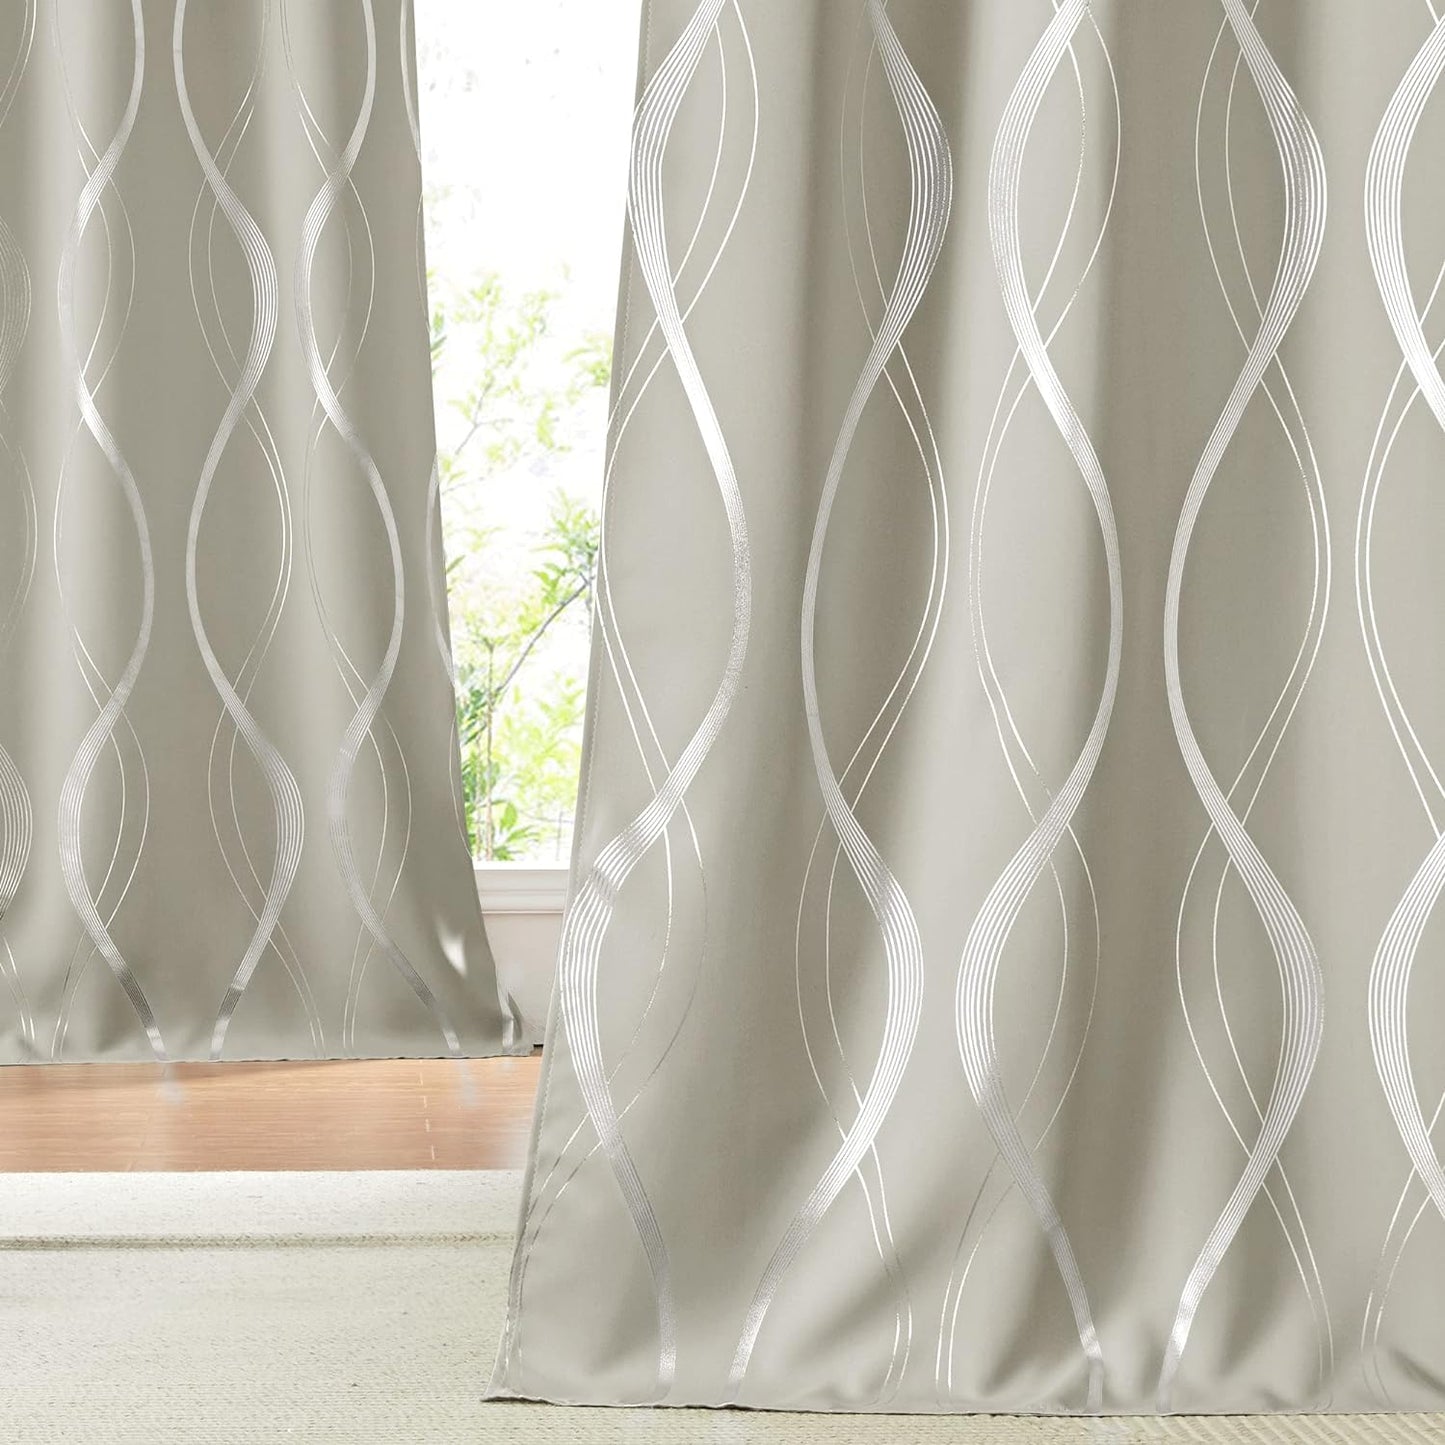 NICETOWN Grey Blackout Curtains 84 Inch Length 2 Panels Set for Bedroom/Living Room, Noise Reducing Thermal Insulated Wave Line Foil Print Drapes for Patio Sliding Glass Door (52 X 84, Gray)  NICETOWN Natural 52"W X 84"L 